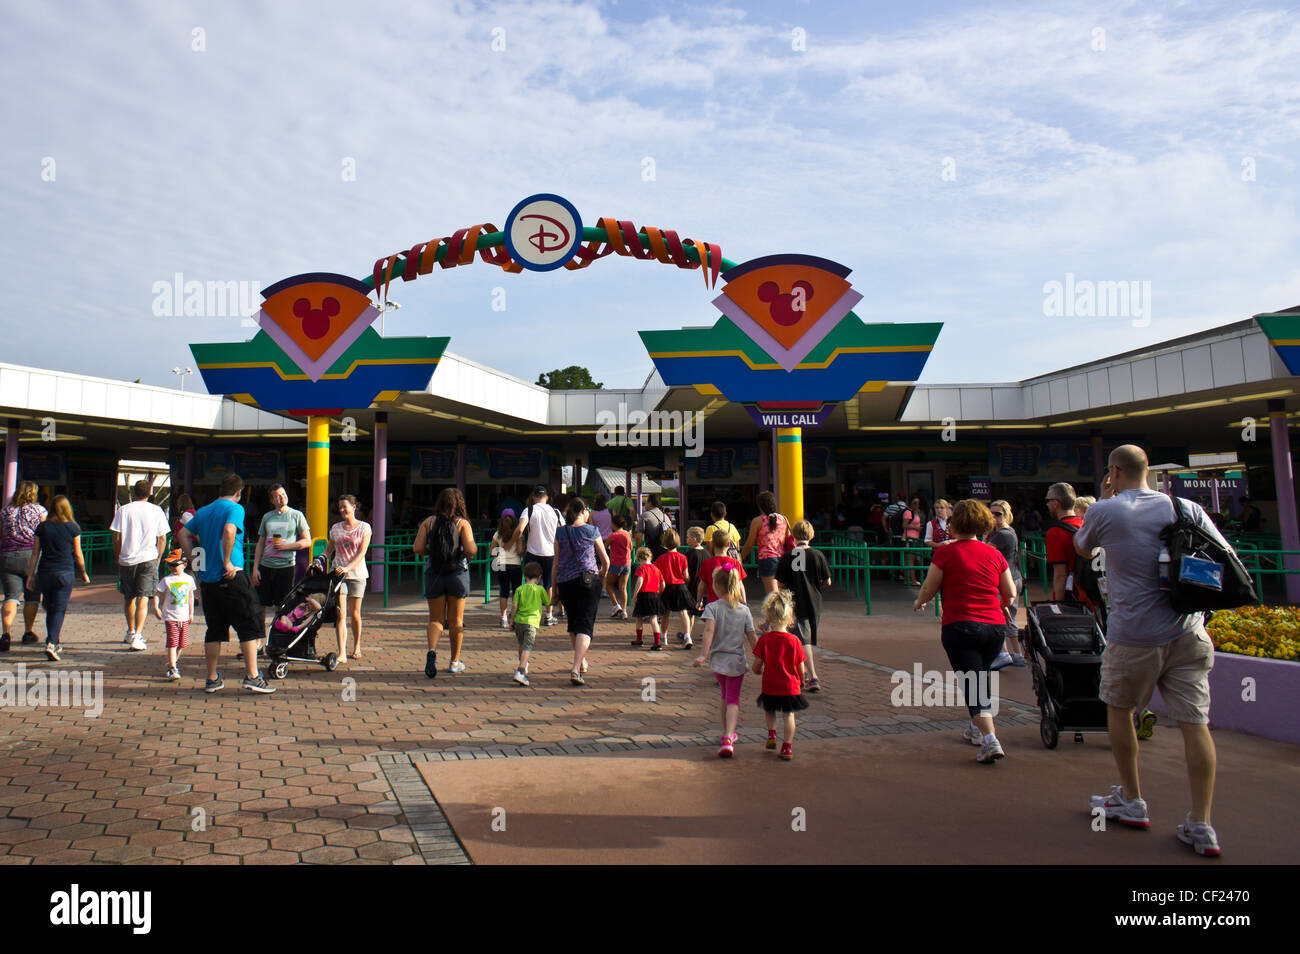 Visitors arrive at the ticket gate for Magic Kingdom Park, Walt Disney World, in Florida- February 2012 Stock Photo